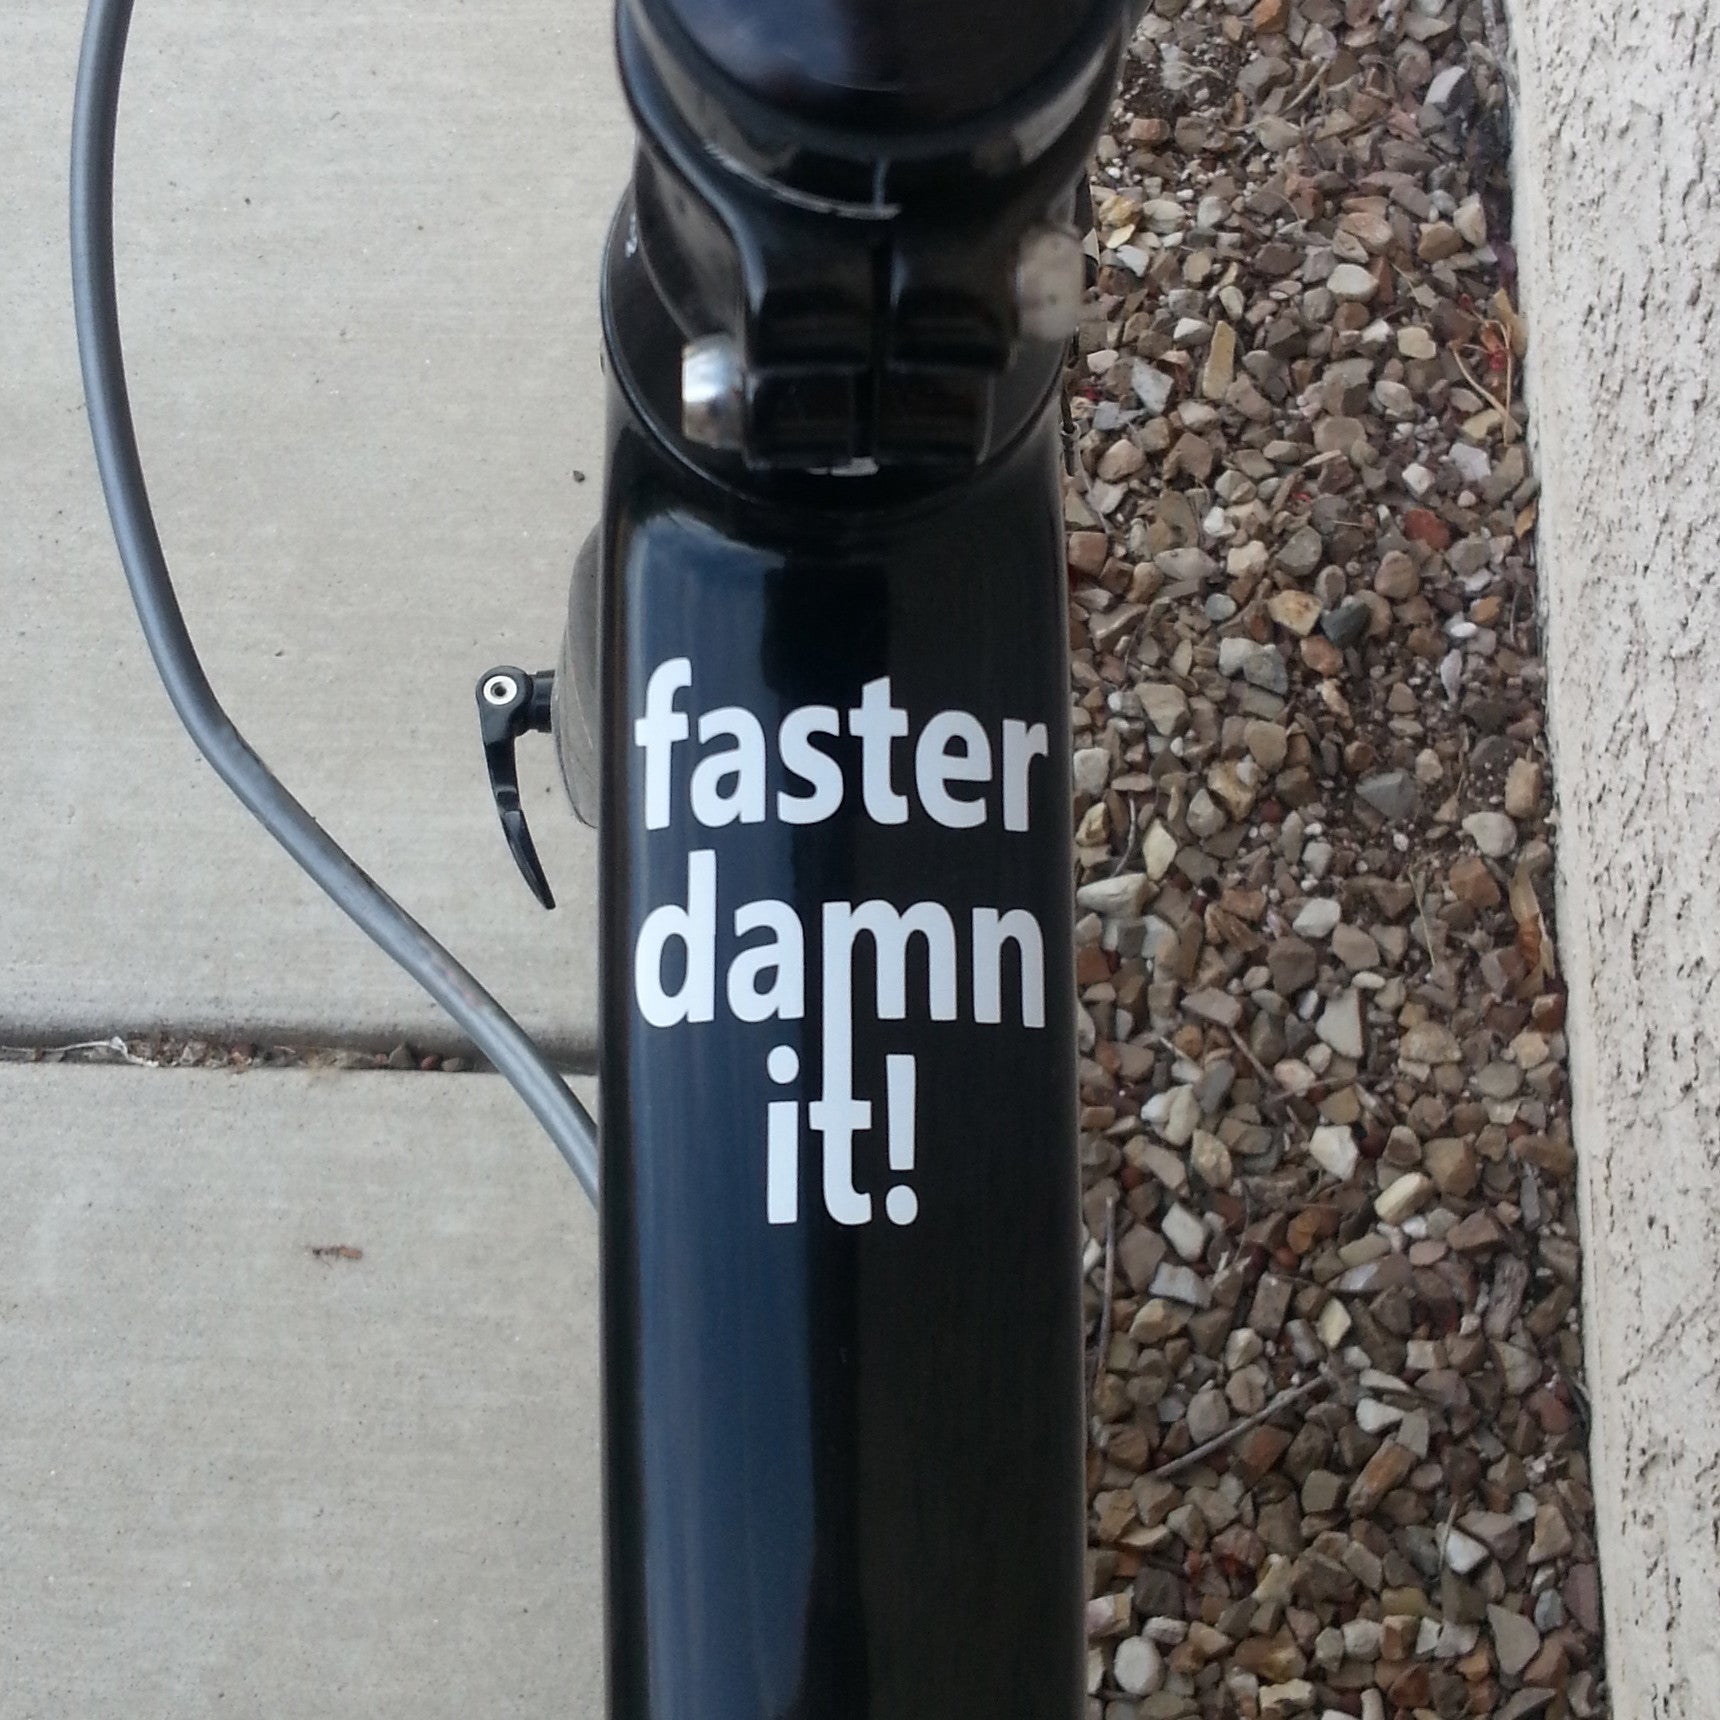 2 x Top Tube Decals. Faster damn it! – MOLTENI CYCLING